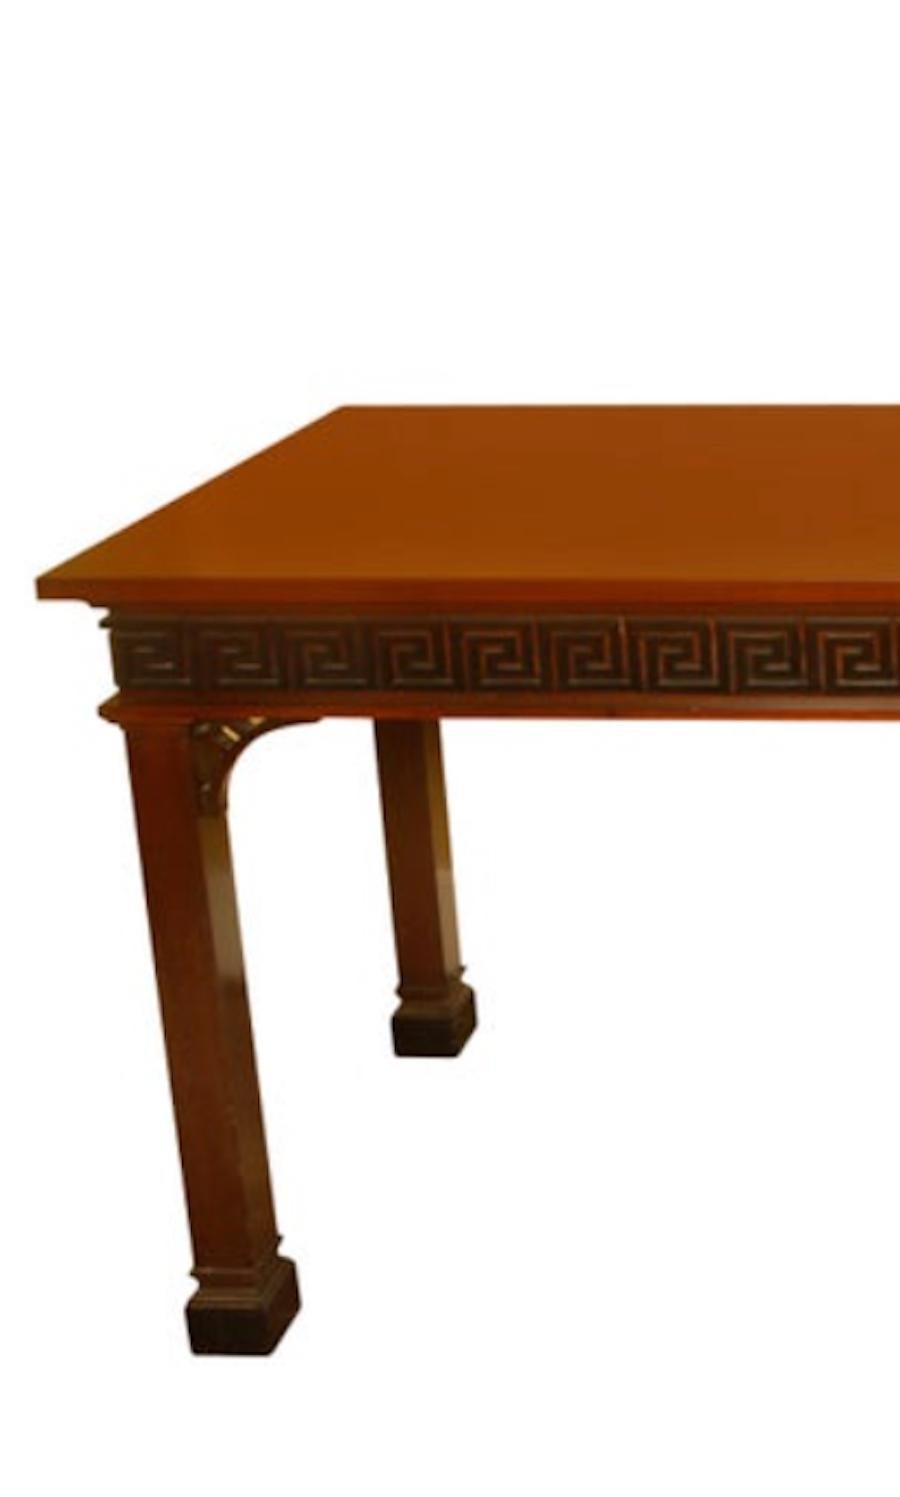 A Chinese Chippendale English mahogany console with fret carved frieze in Greek key design. Beautiful hall table.